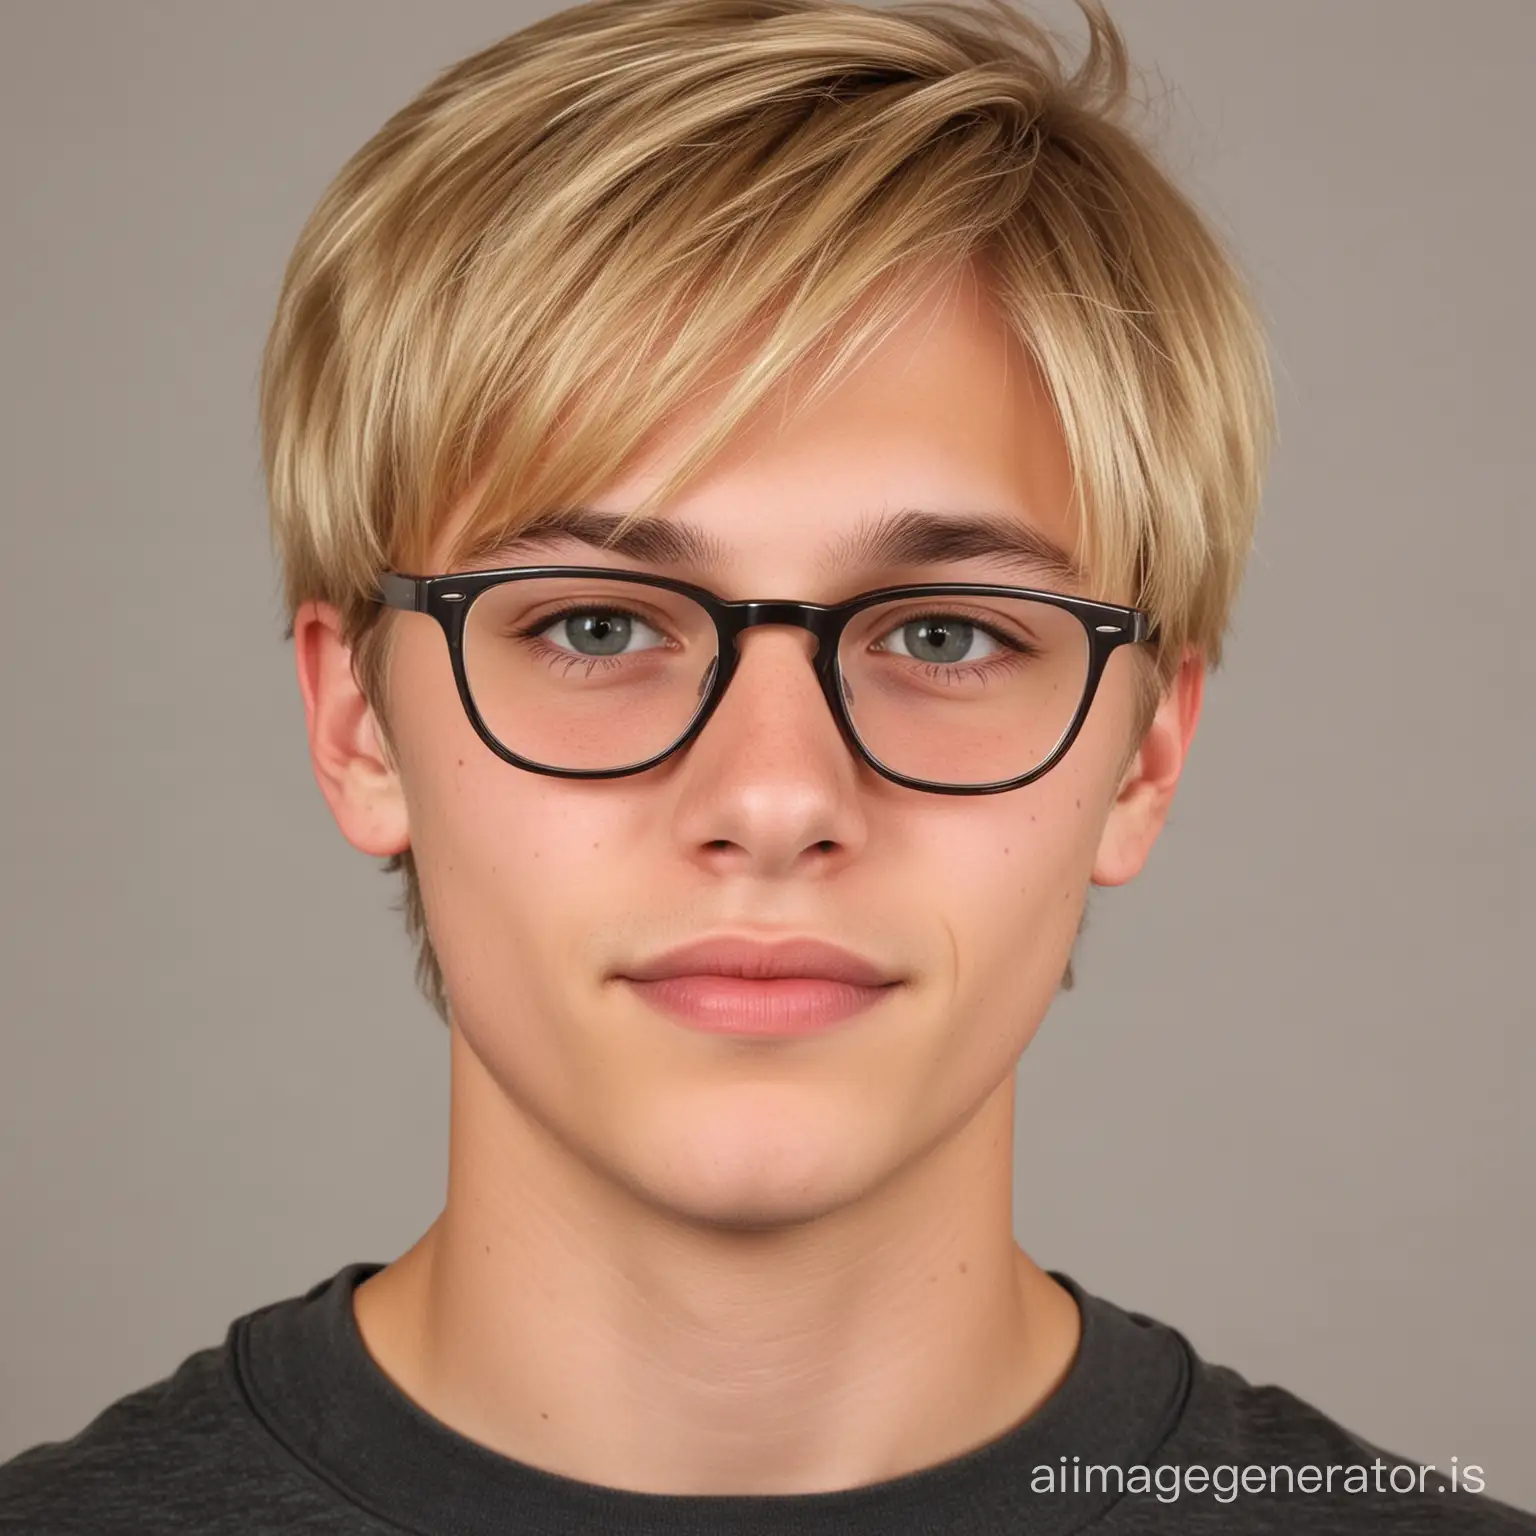 German-Teenage-Boy-with-Blond-Hair-and-Glasses-Portrait